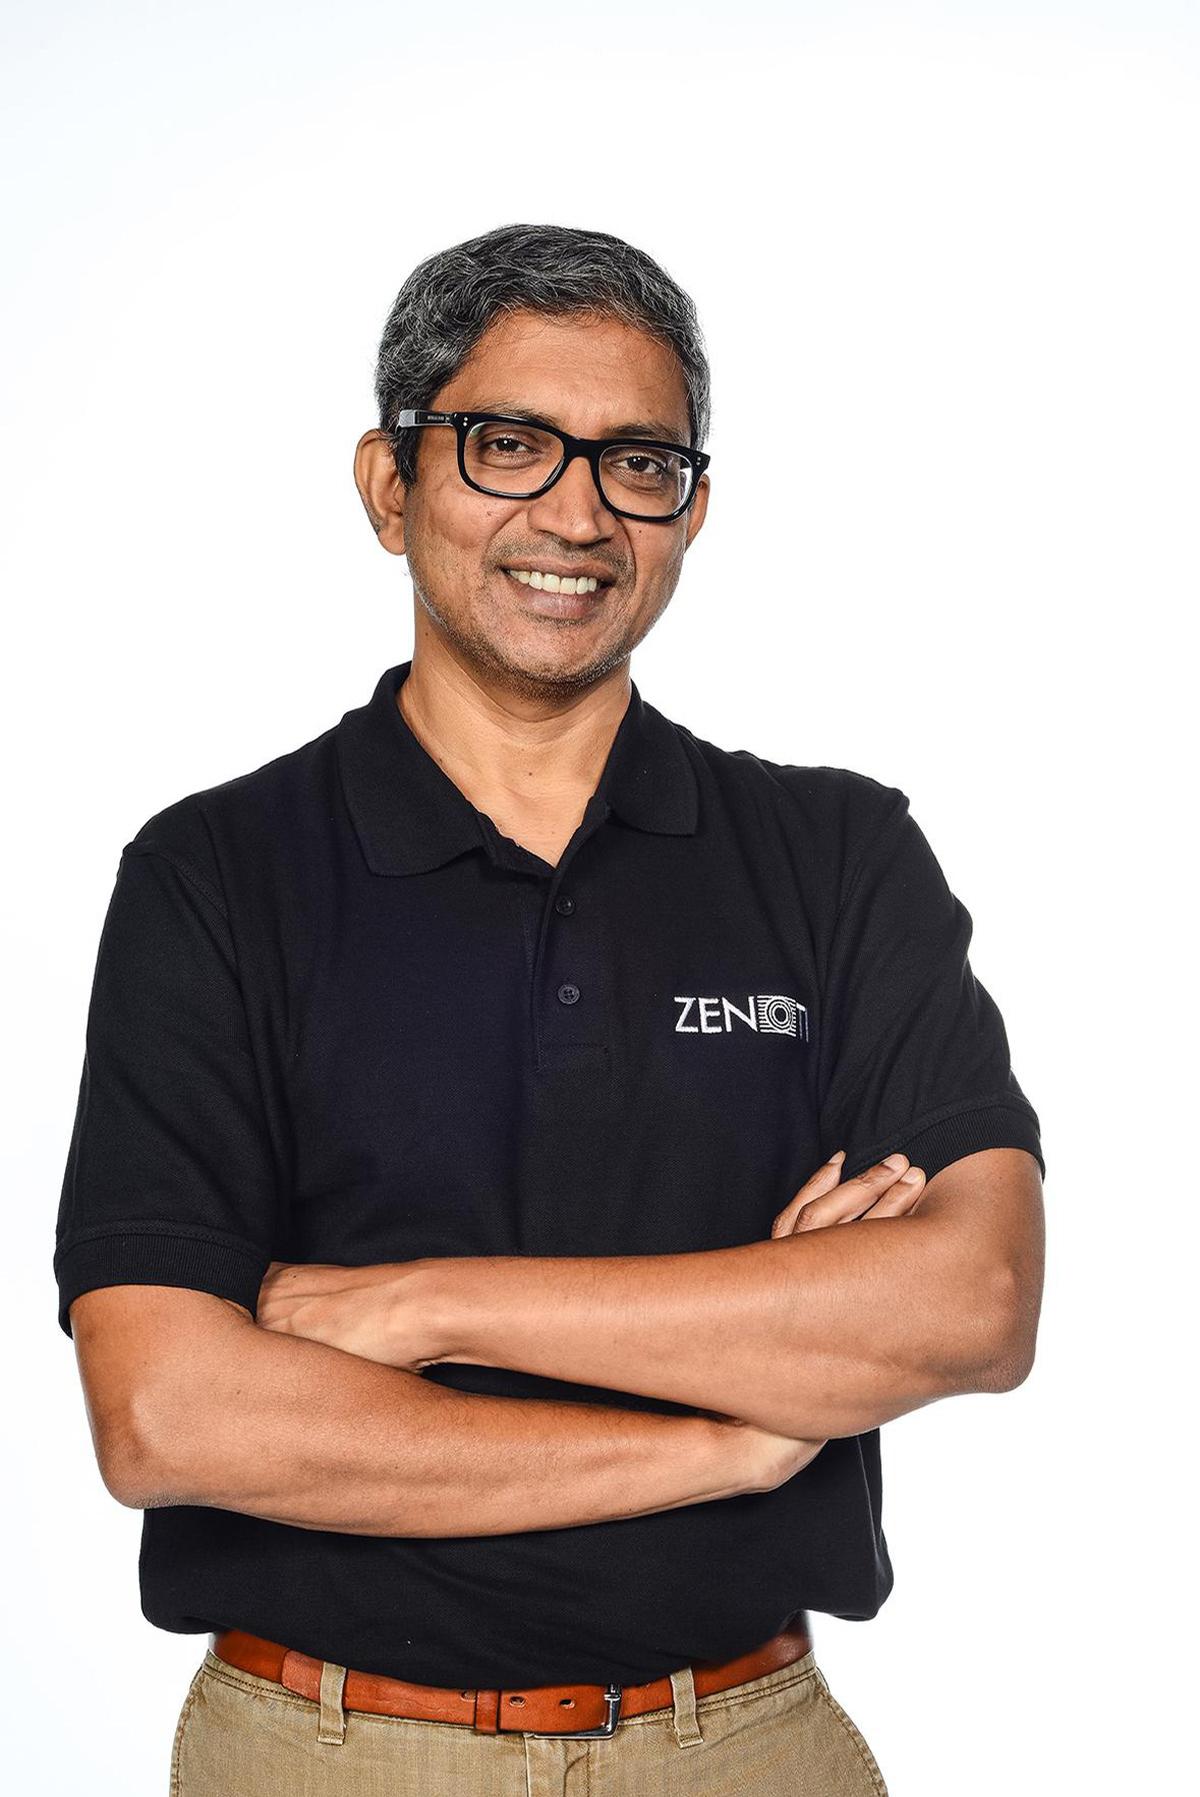 Sudheer Koneru, CEO and founder at Zenoti, says the addiitonal capital will enable the company to continue to expand through forthcoming mergers and acquisitions